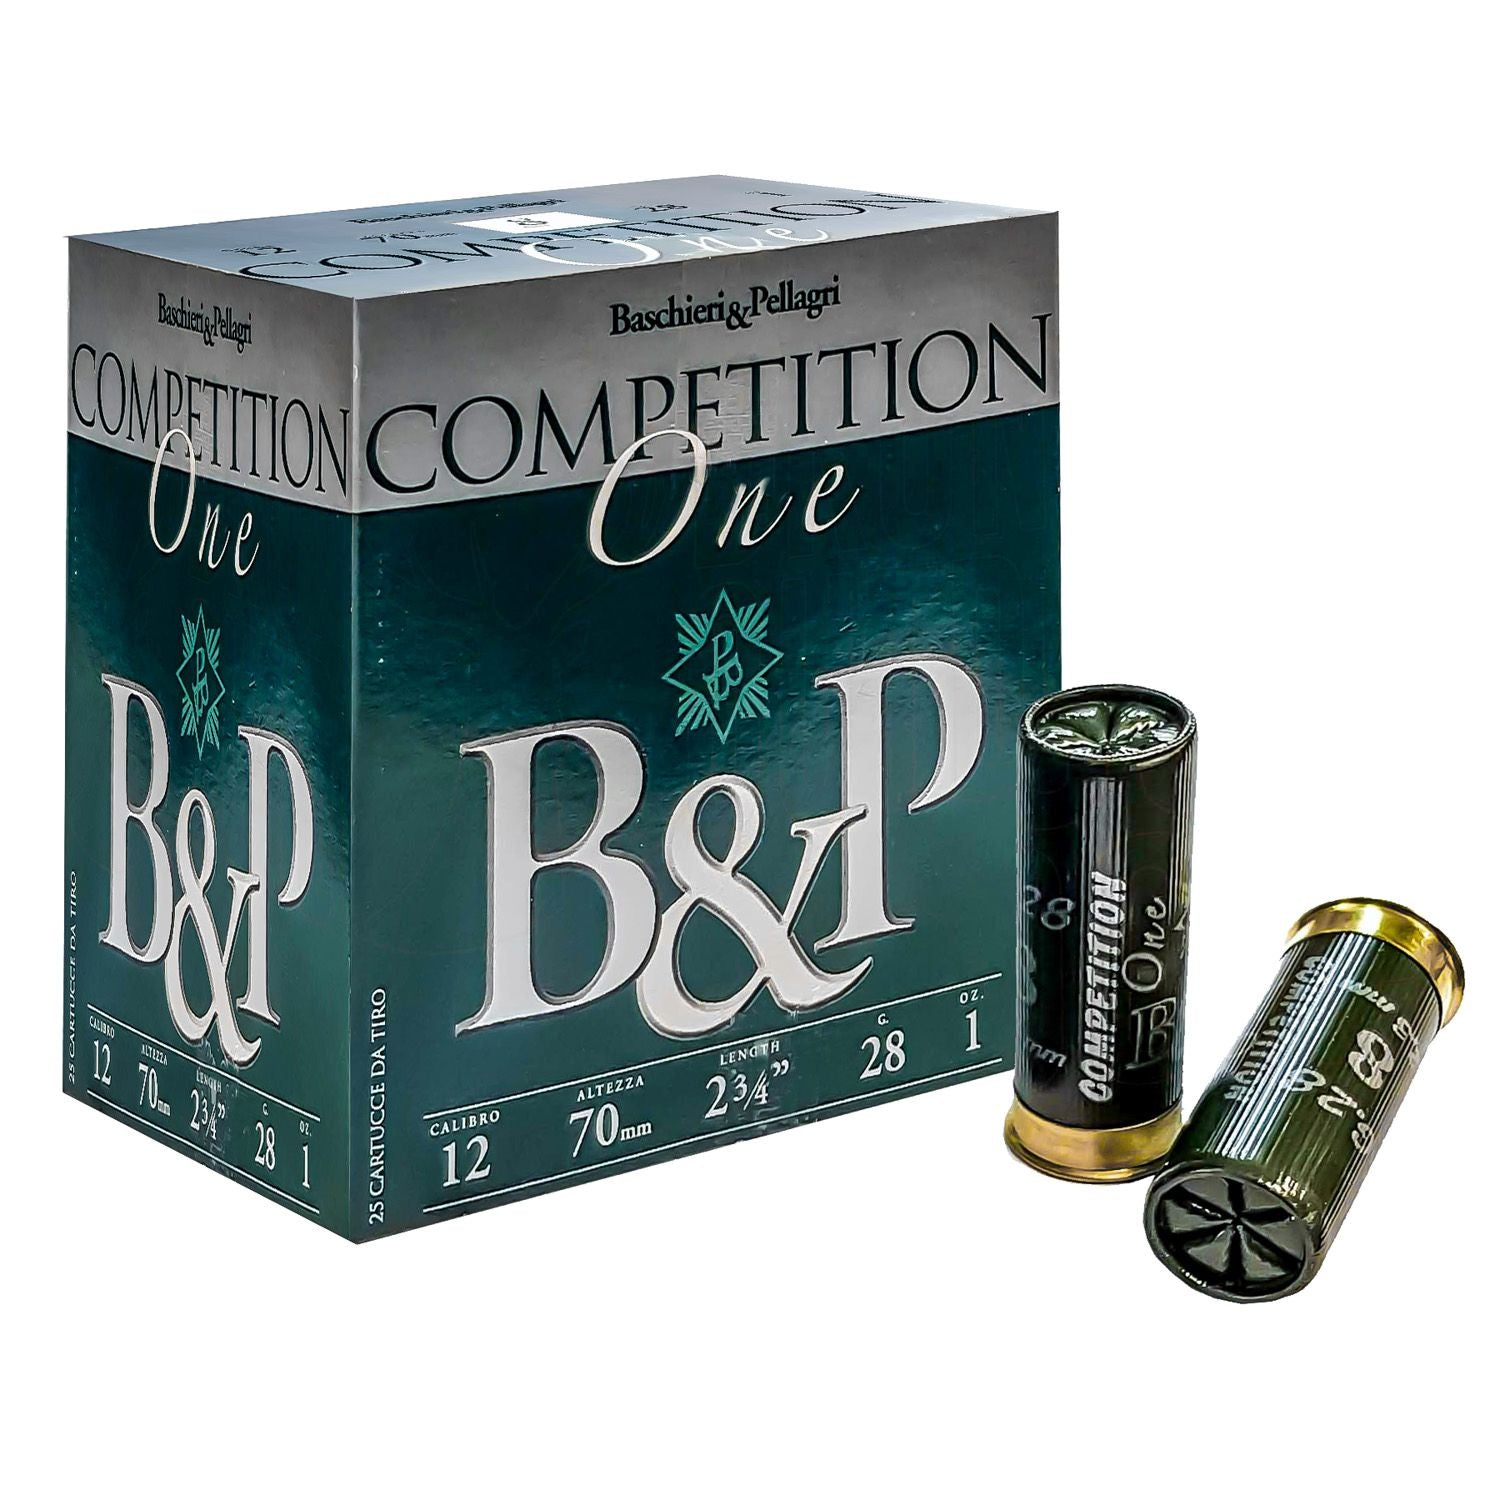 Competition One Lite 2¾" 12g 28g 1200FPS